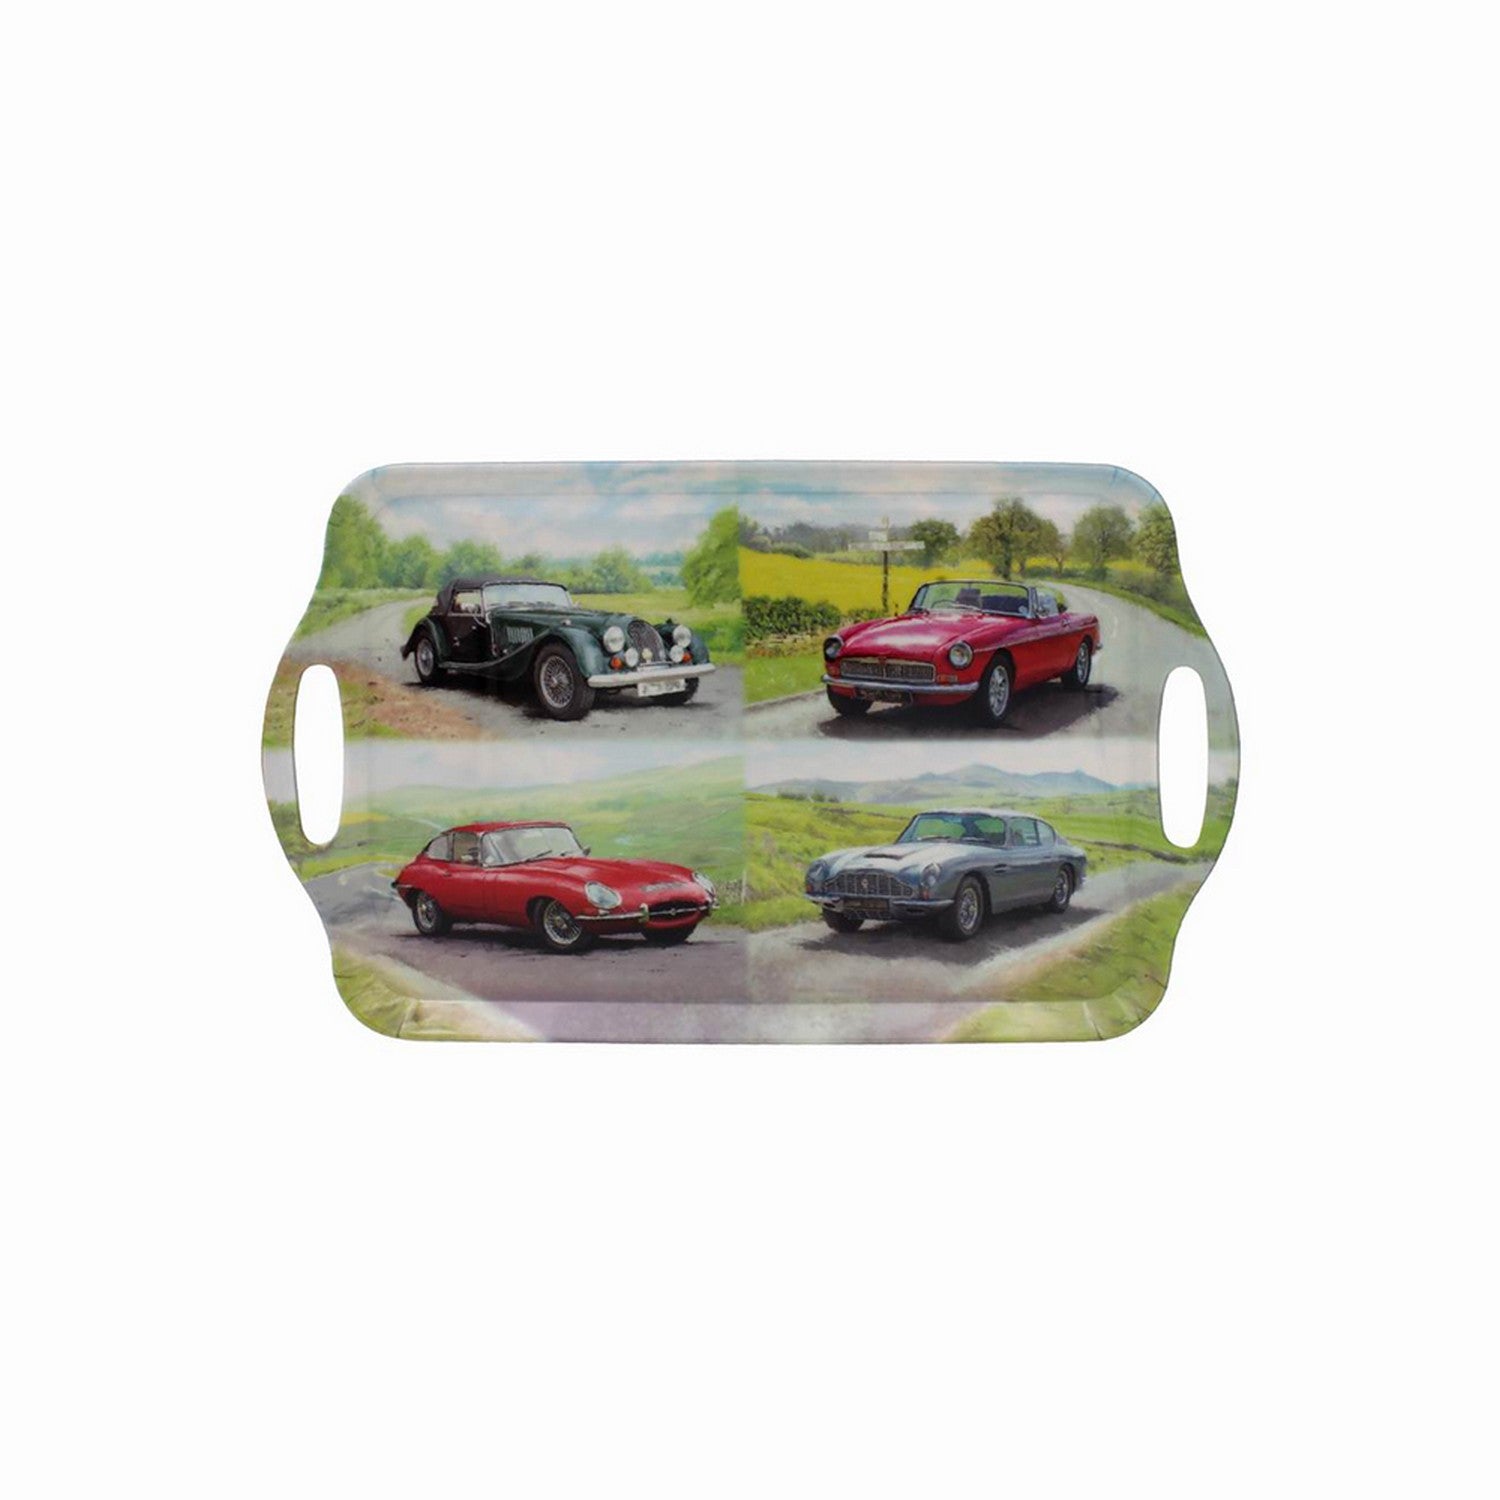 Large Classic Cars Design Serving Tray